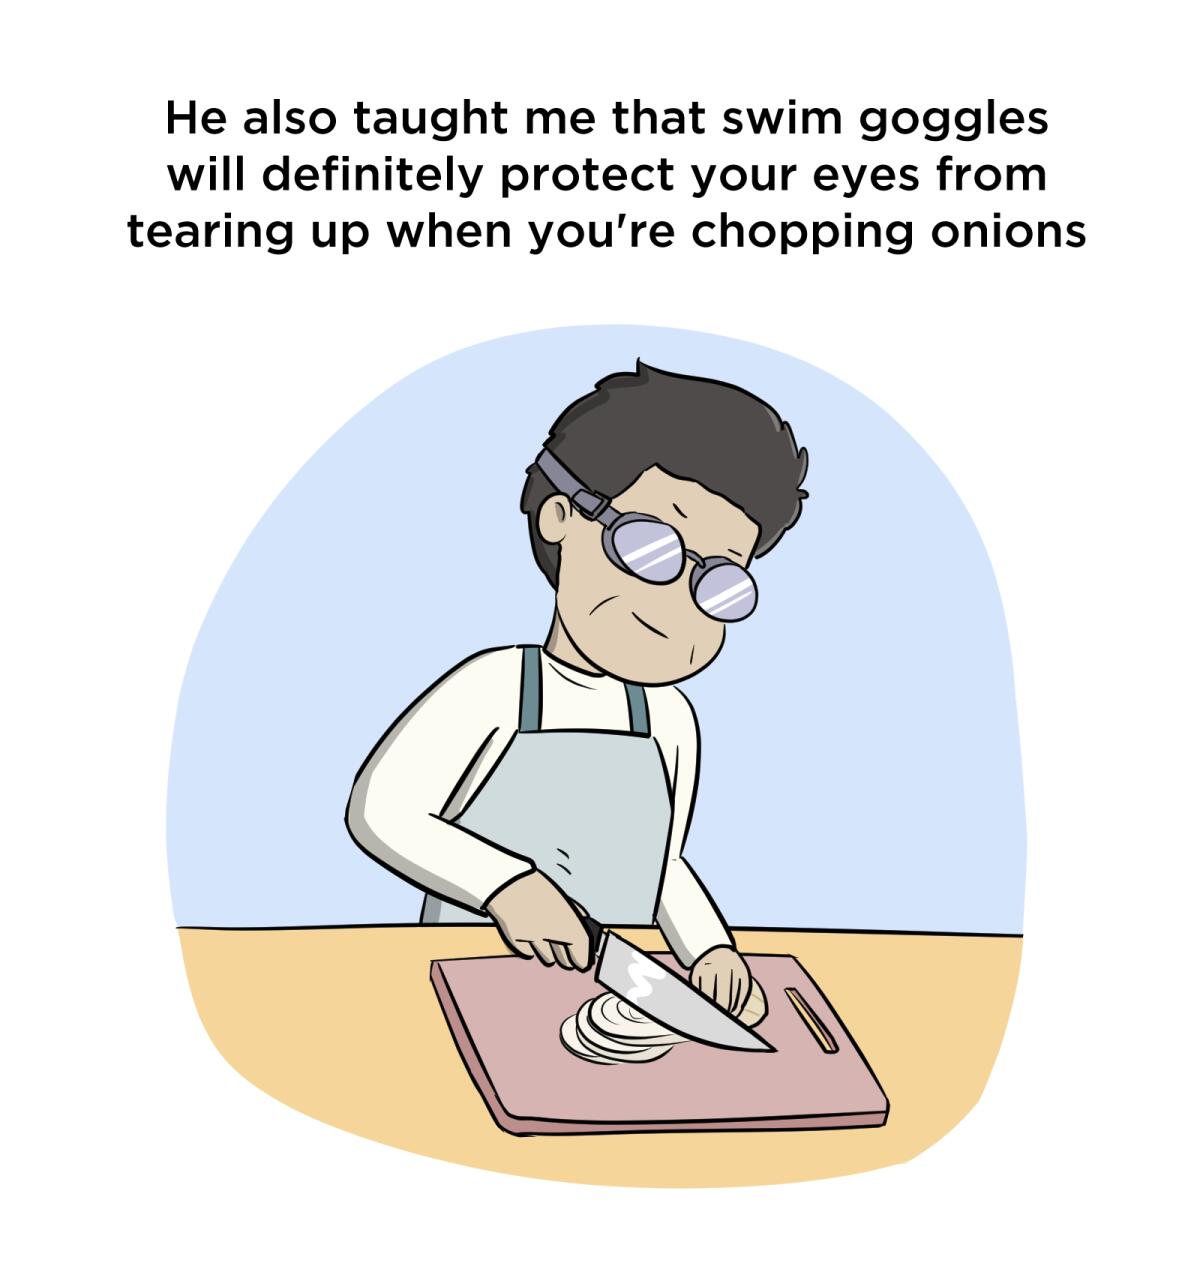 He also taught me that swim goggles will definitely protect your eyes from tearing up when you're chopping onions